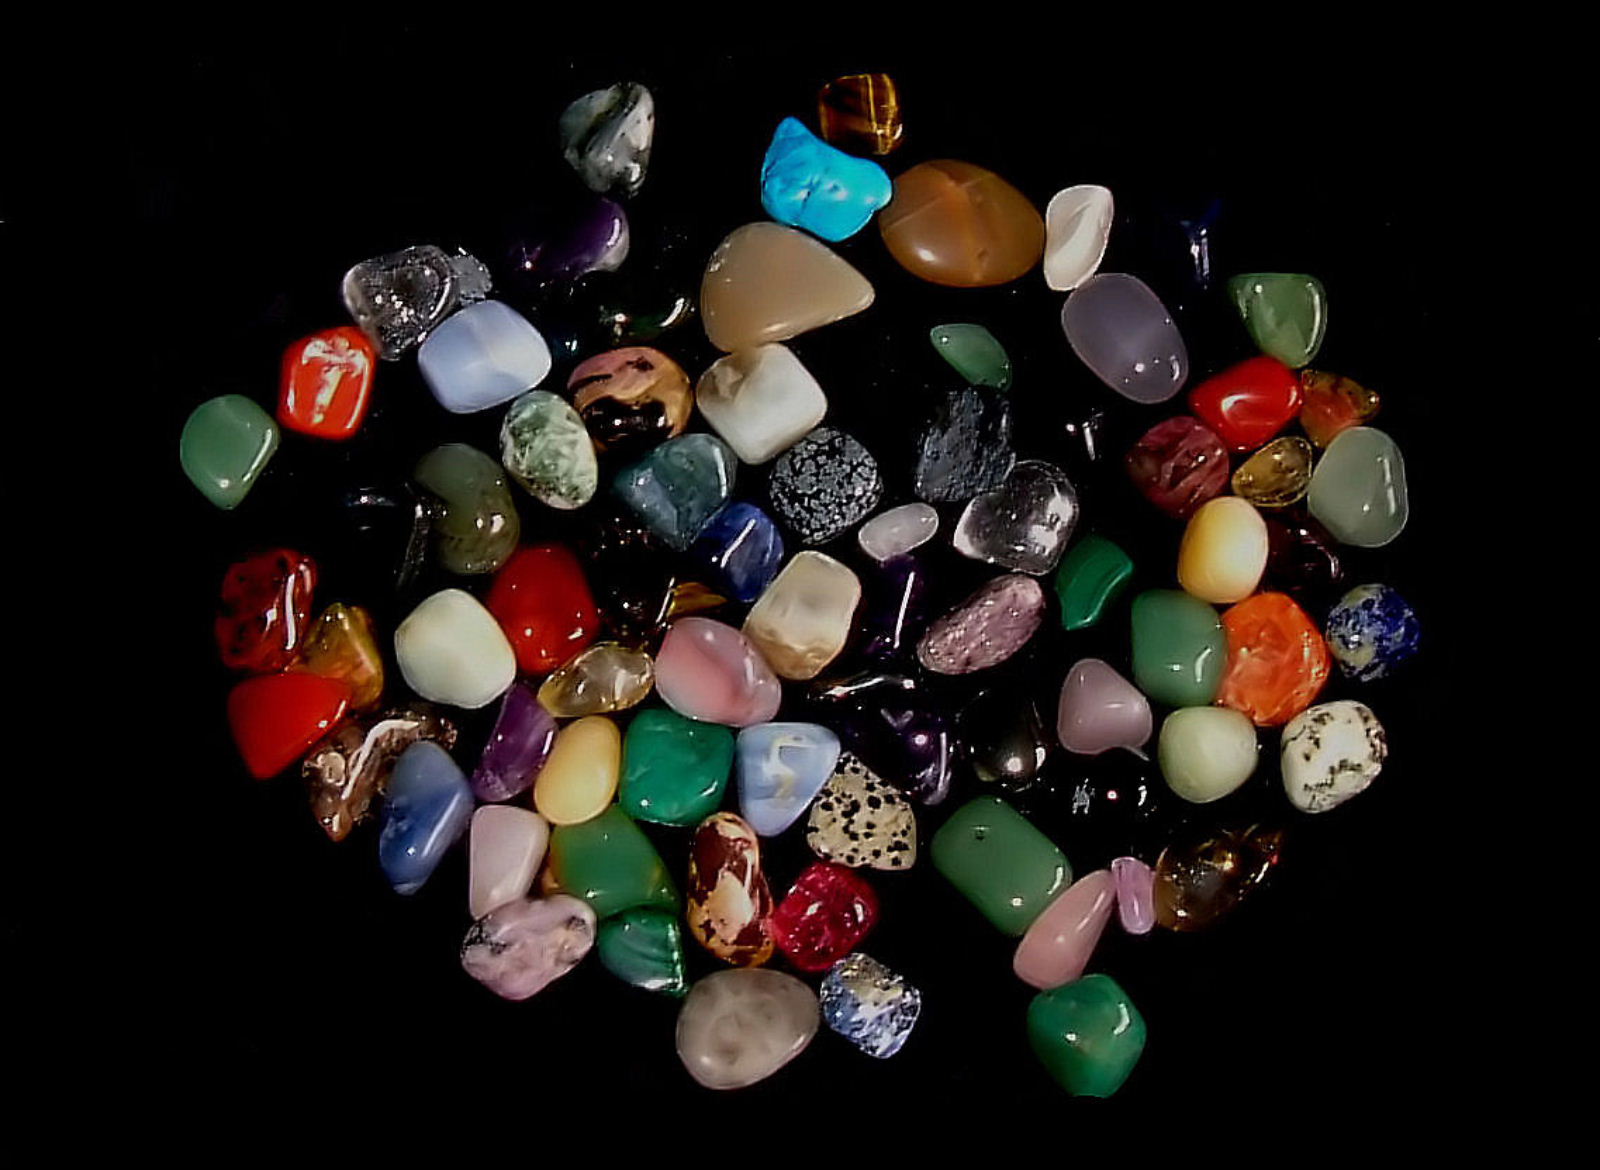 http://www.turbophoto.com/Free-Stock-Images/Images/Colored%20Polished%20Rocks.JPG